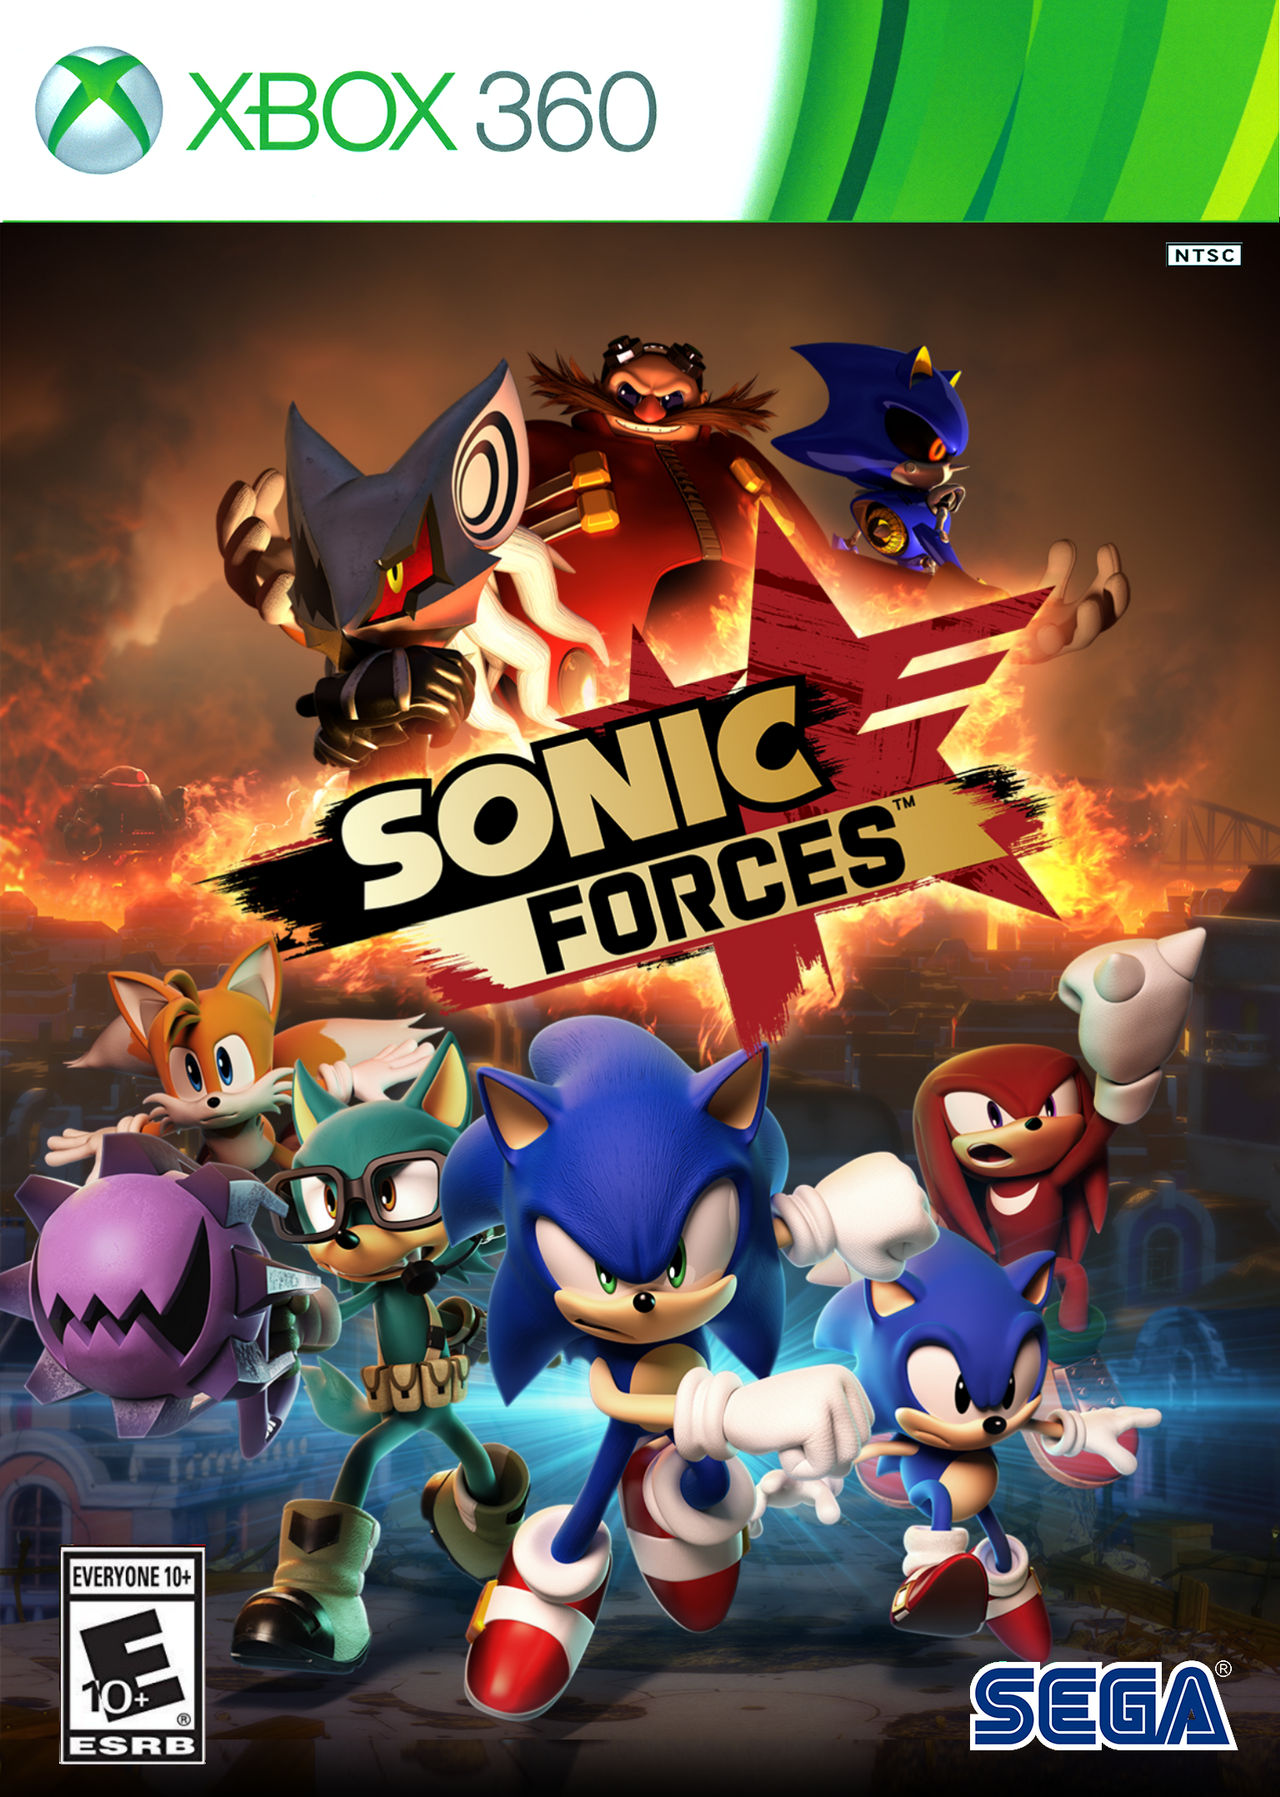 Sonic Forces Xbox 360 (2017) by SonicLoud1213 on DeviantArt